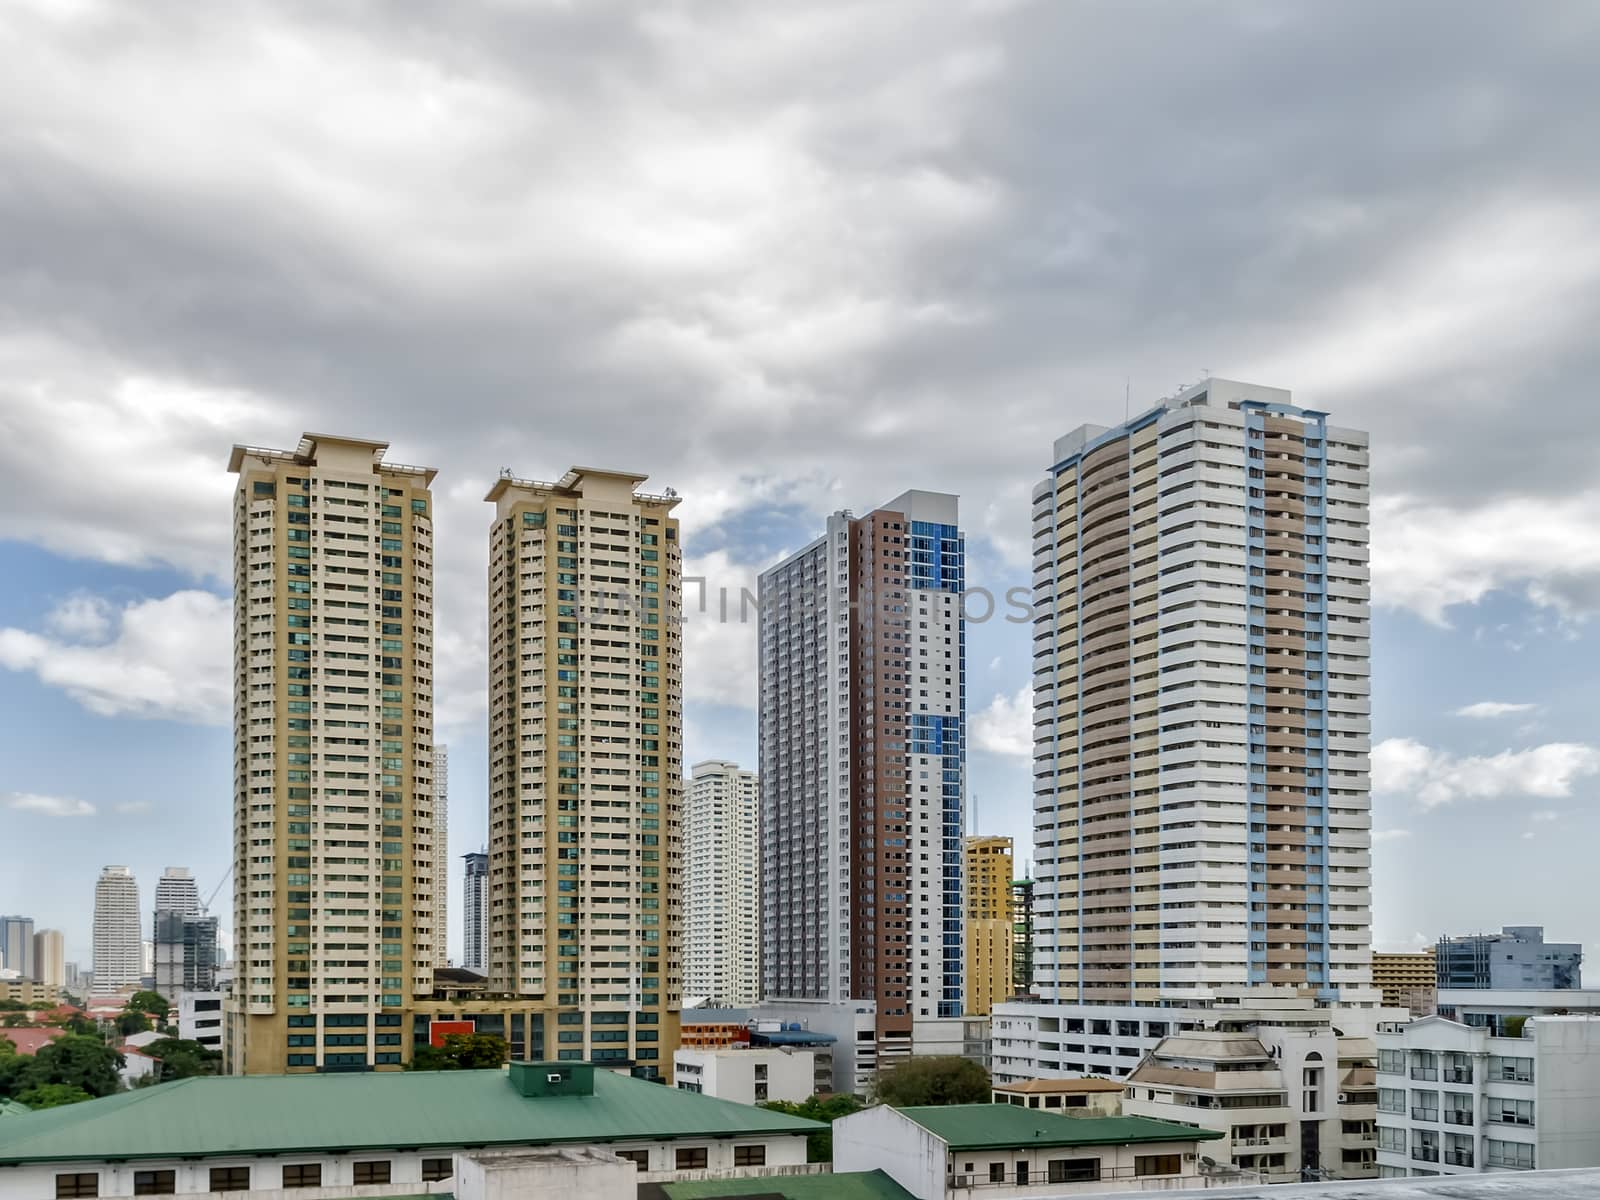 Dark clouds over tall buildings in Manila, Philippines